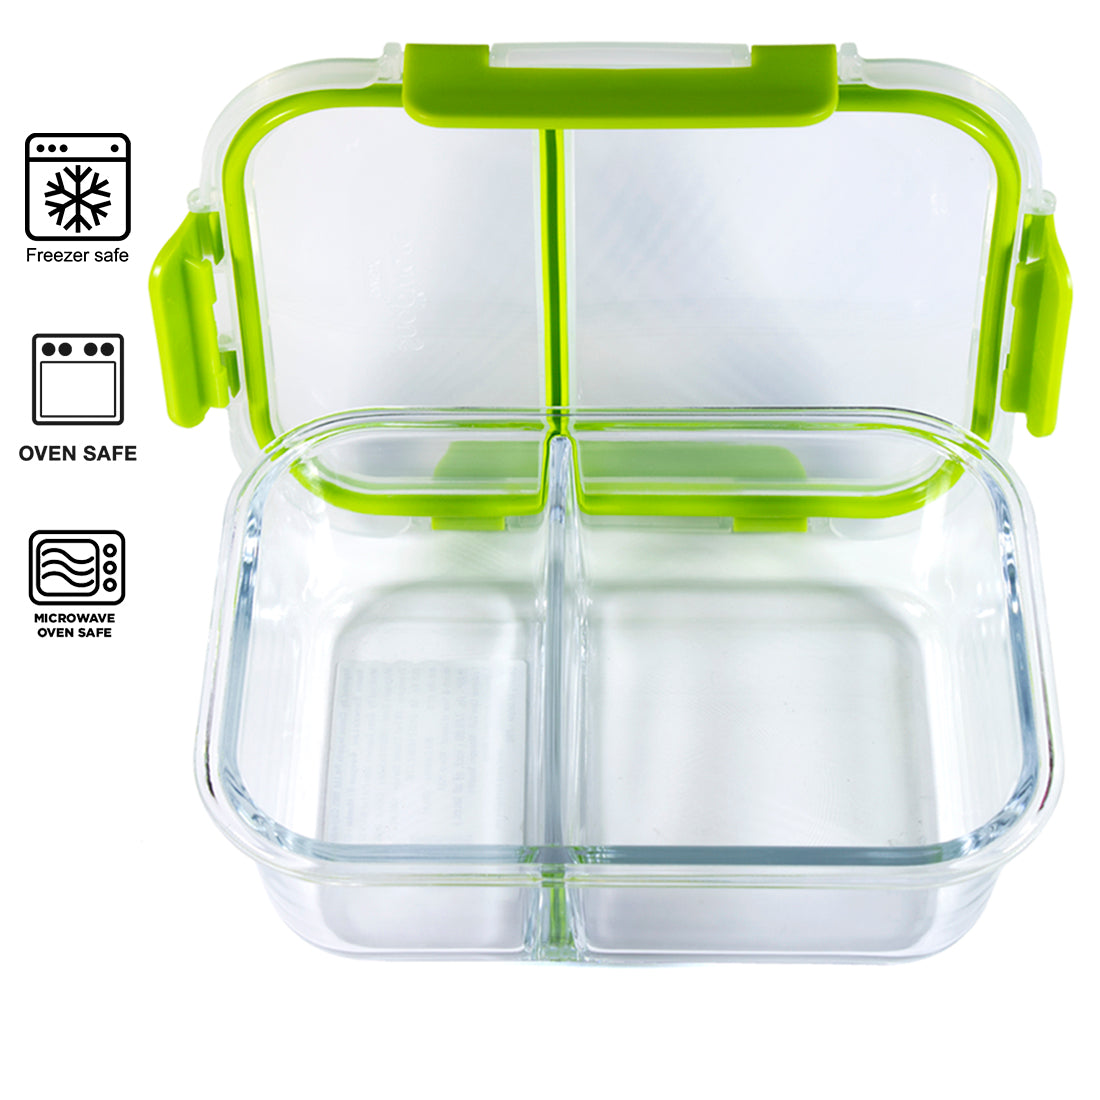 Snapware Leak-Proof Eco Clean Glass Storage Container with Air